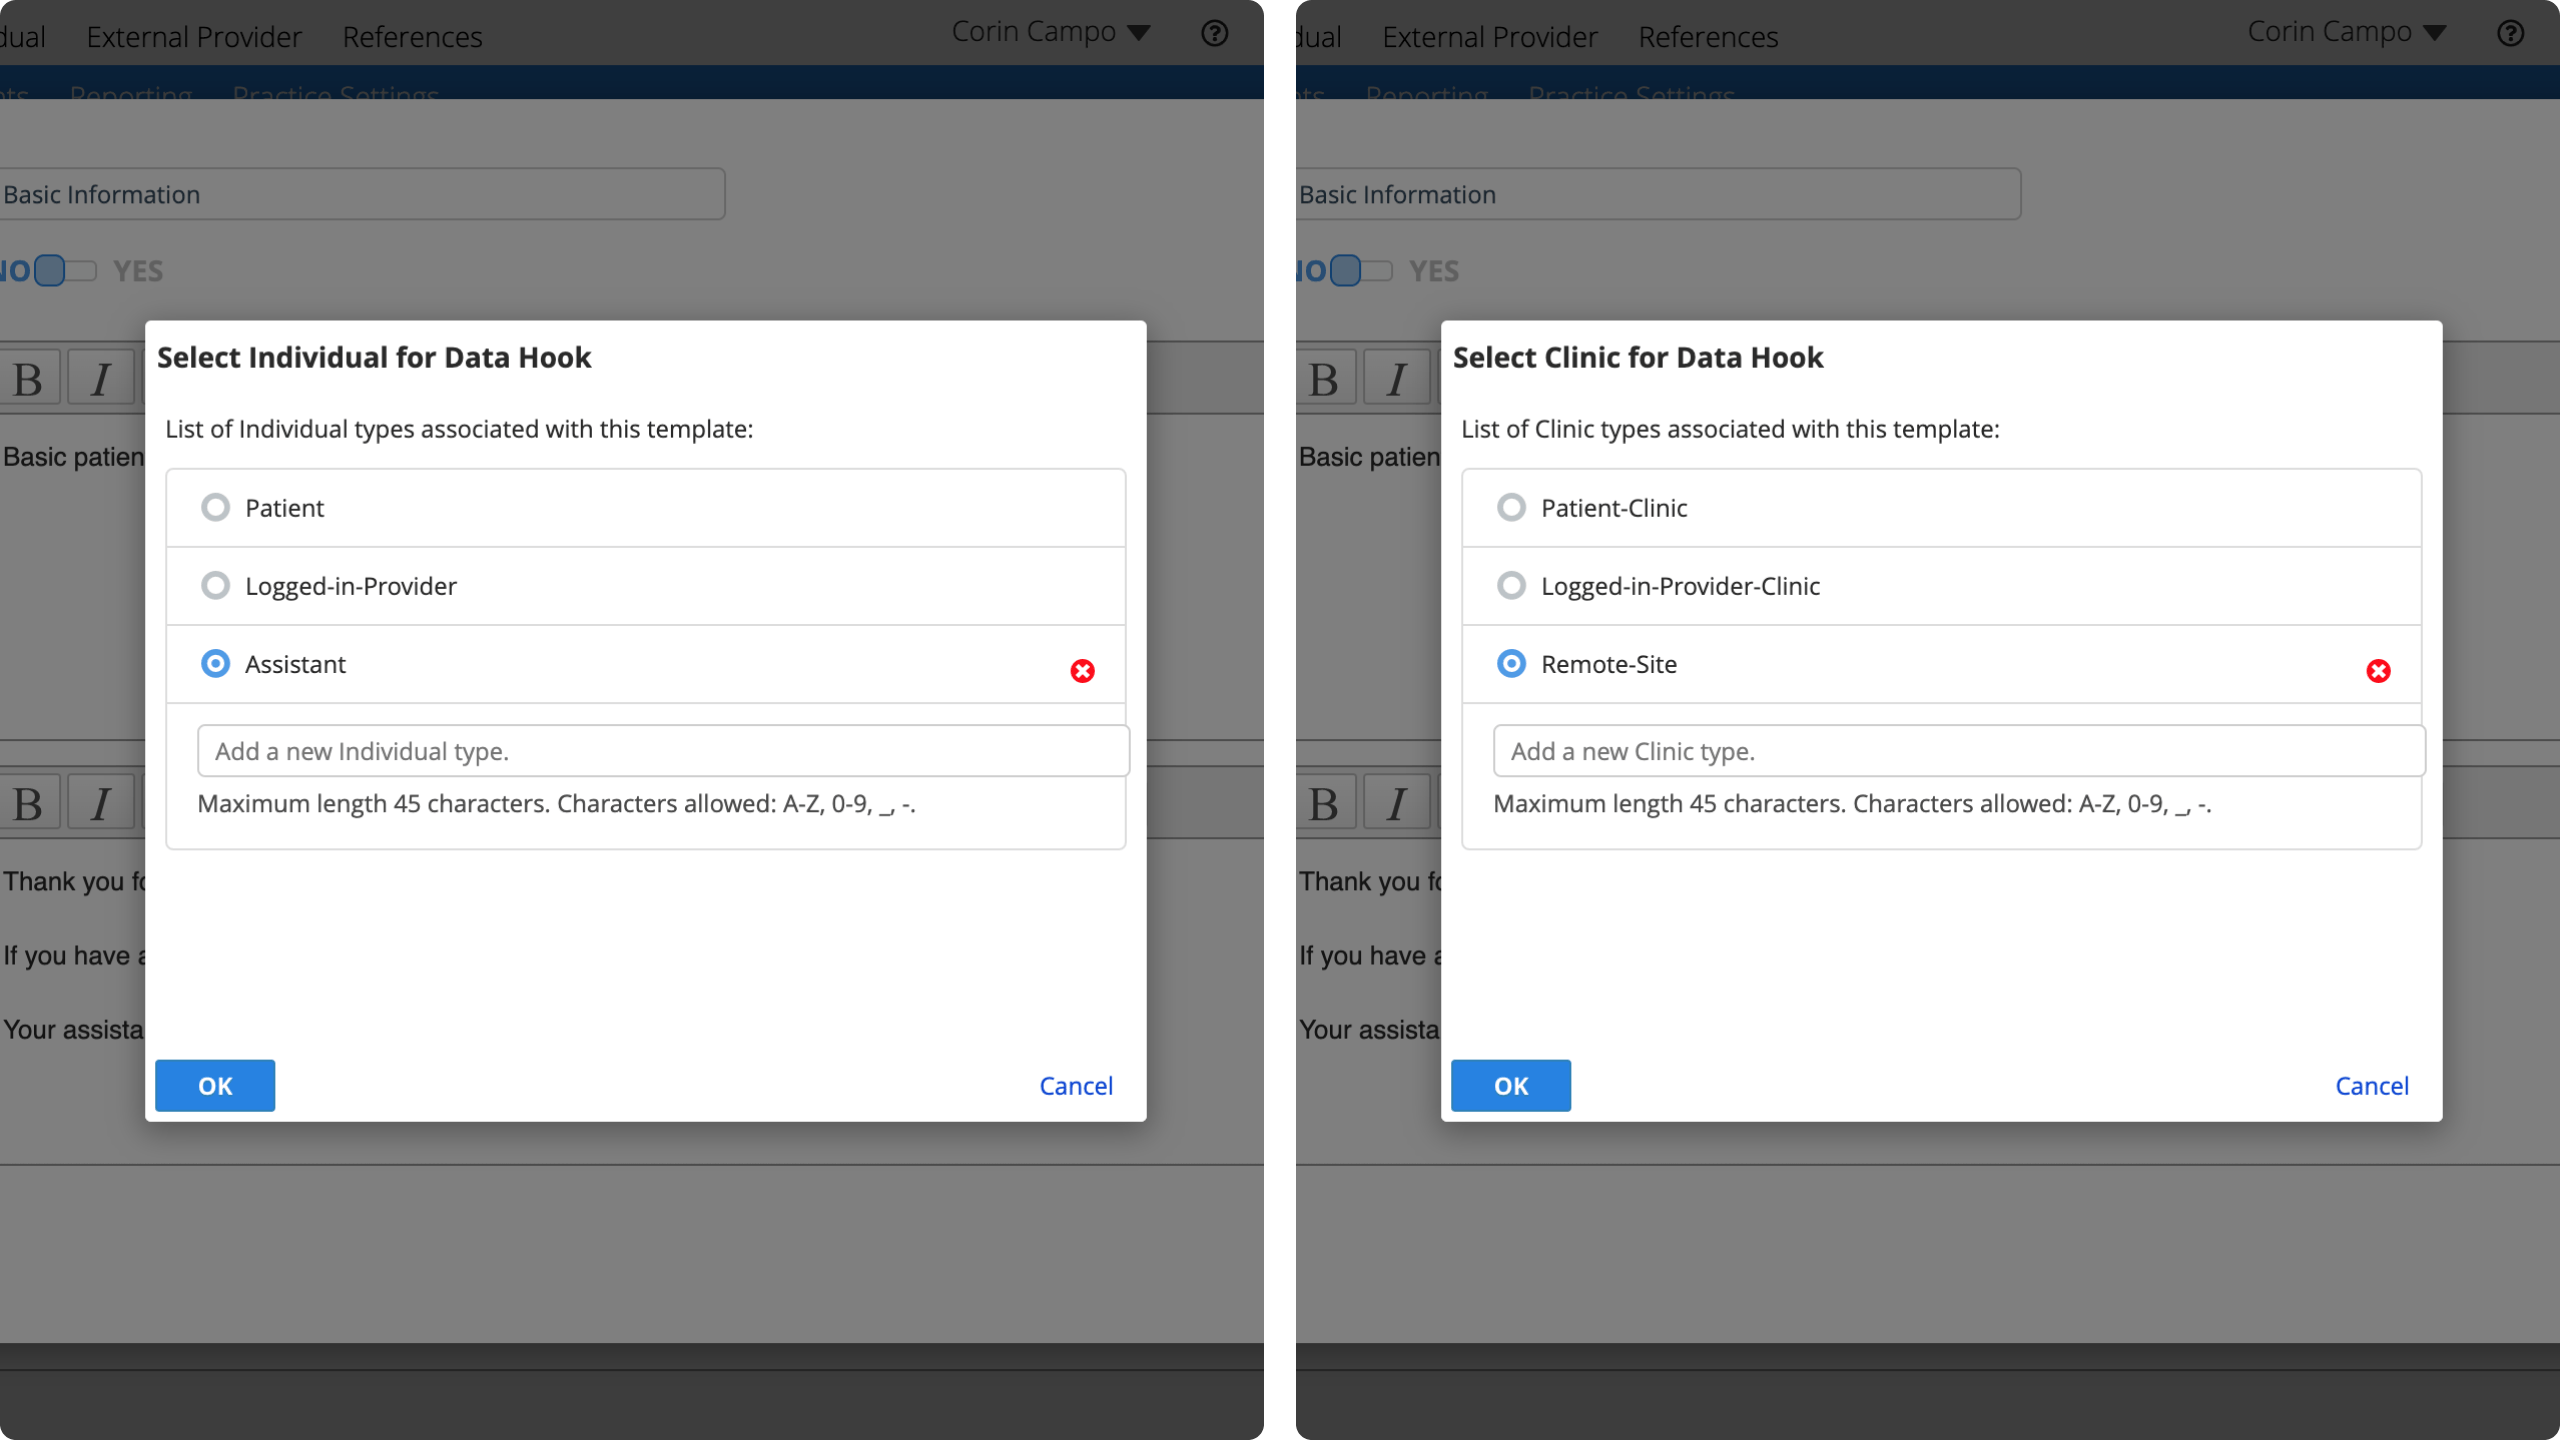 Patient and logged-in-provider are always the first two options above custom types for both individual and clinic data hooks.